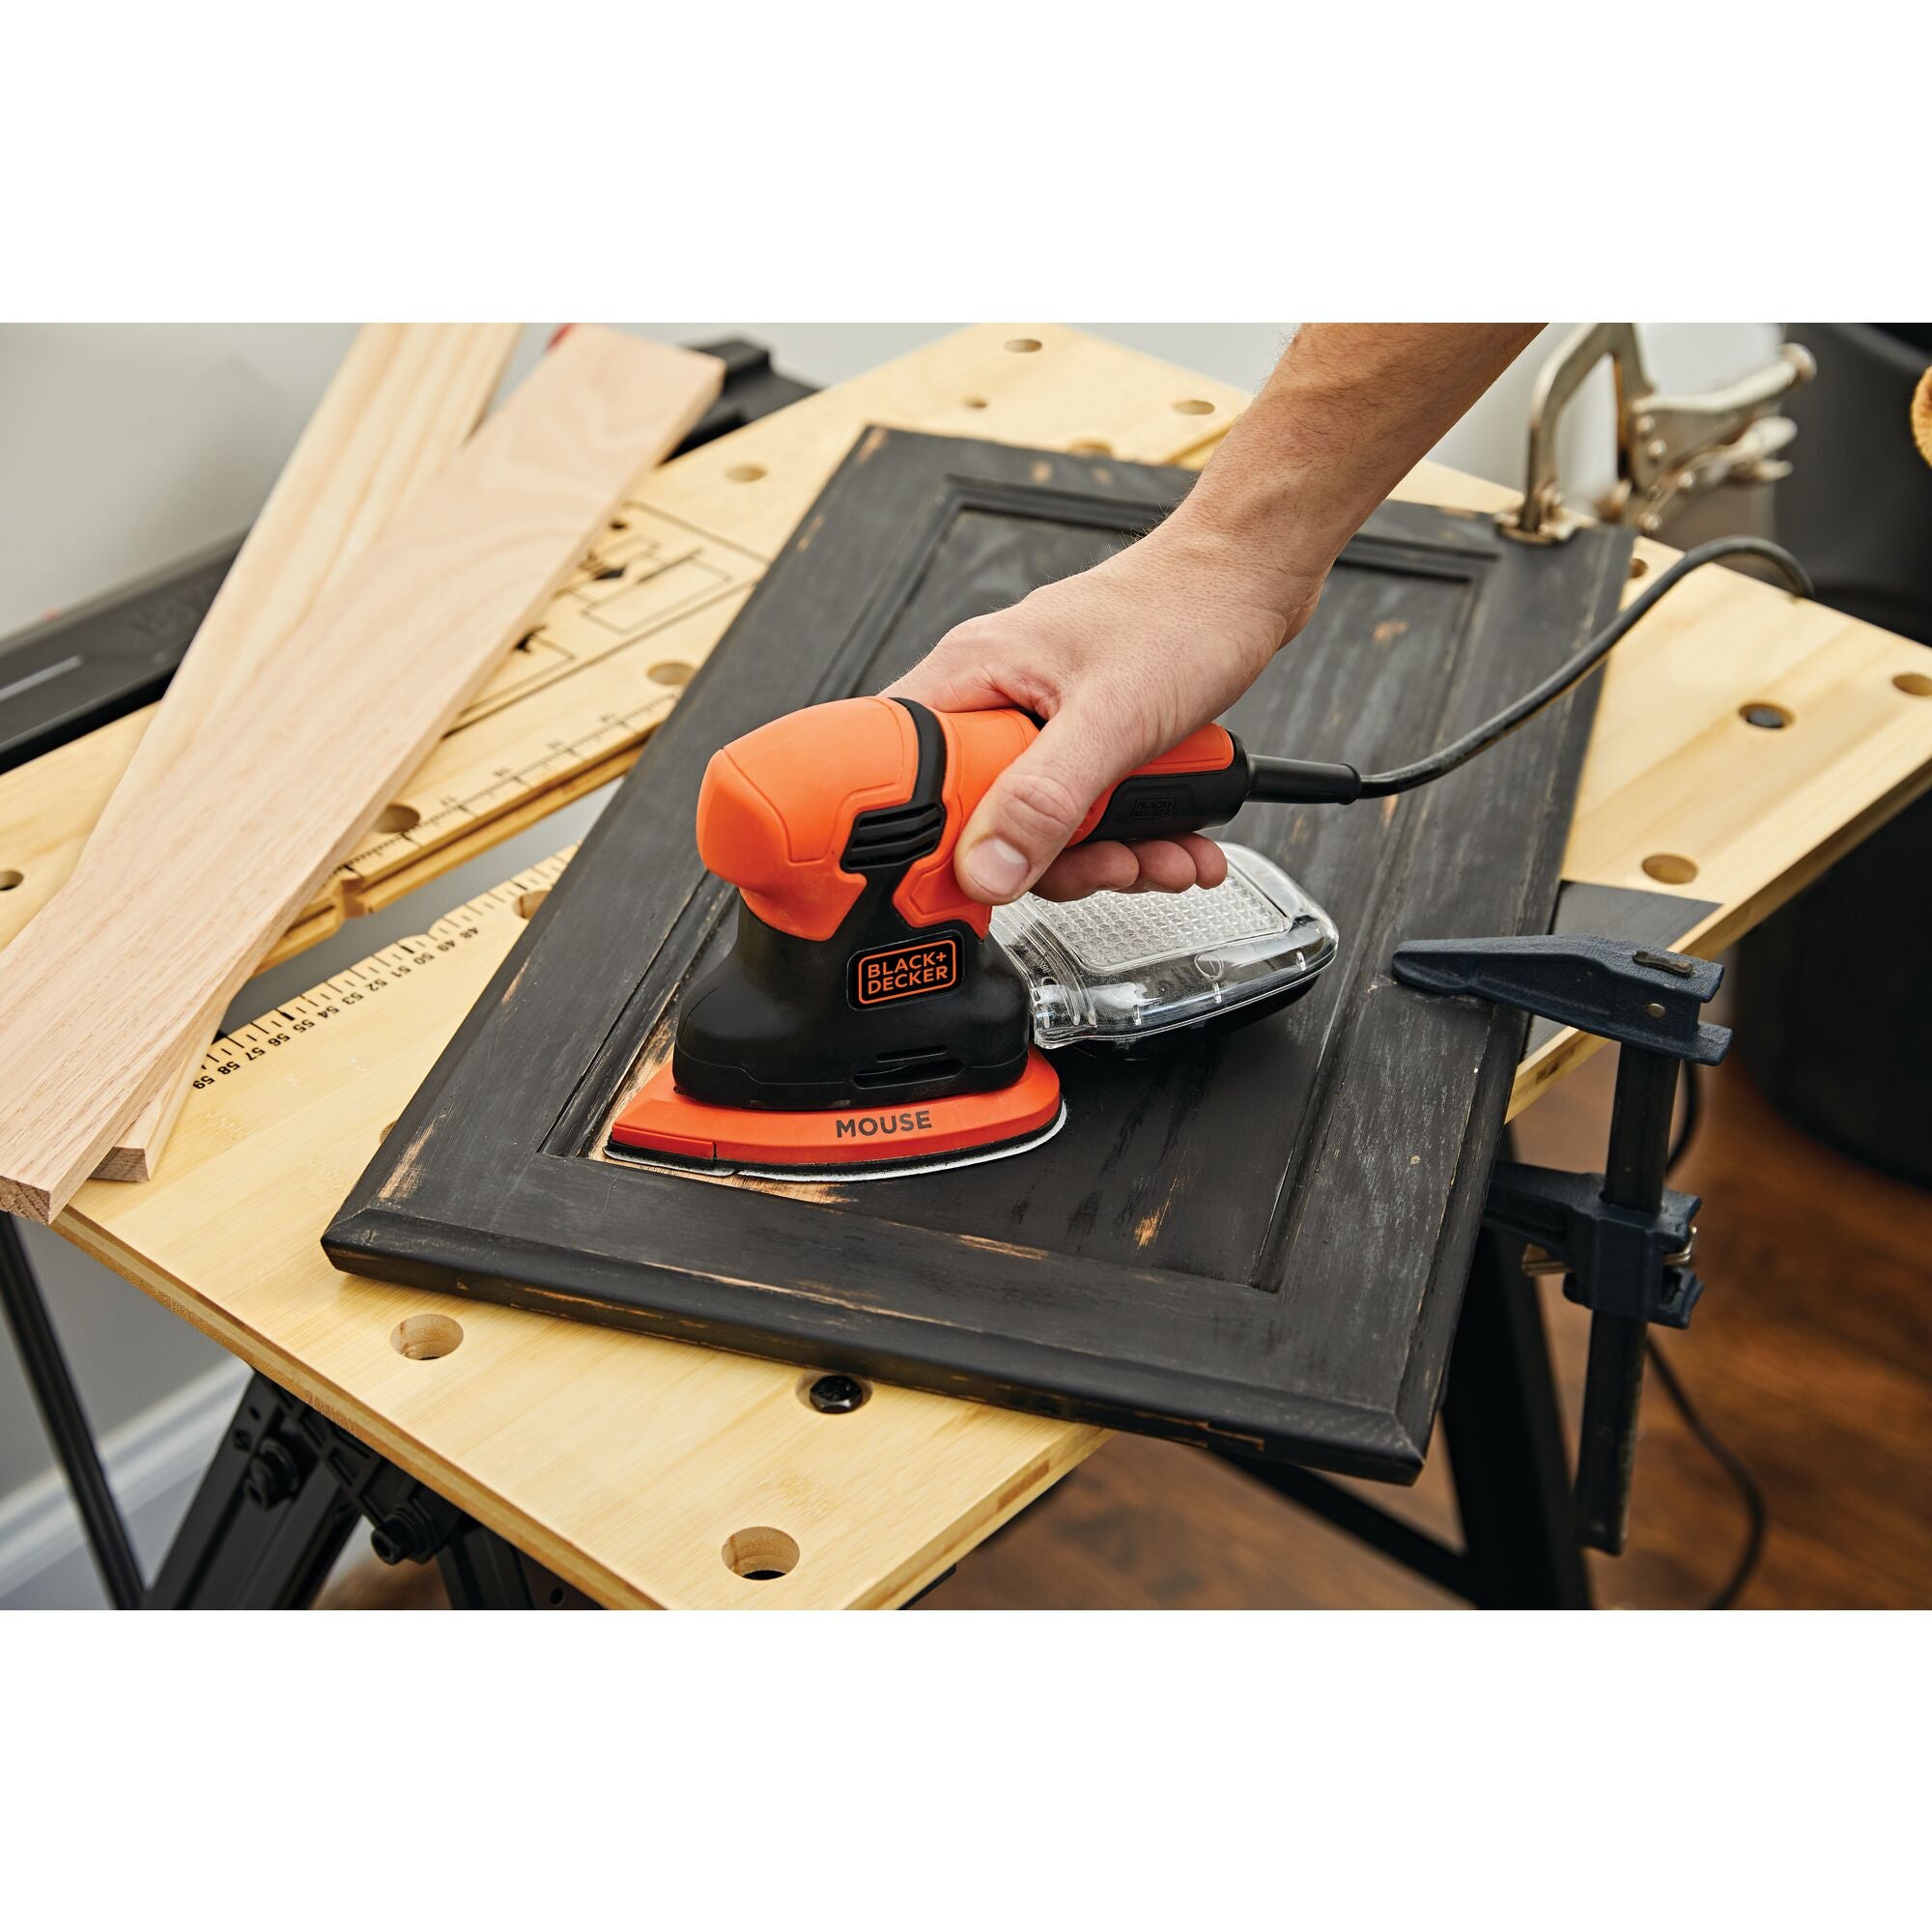 1.2 Ampere mouse sander being used by a person to sand wooden frame.